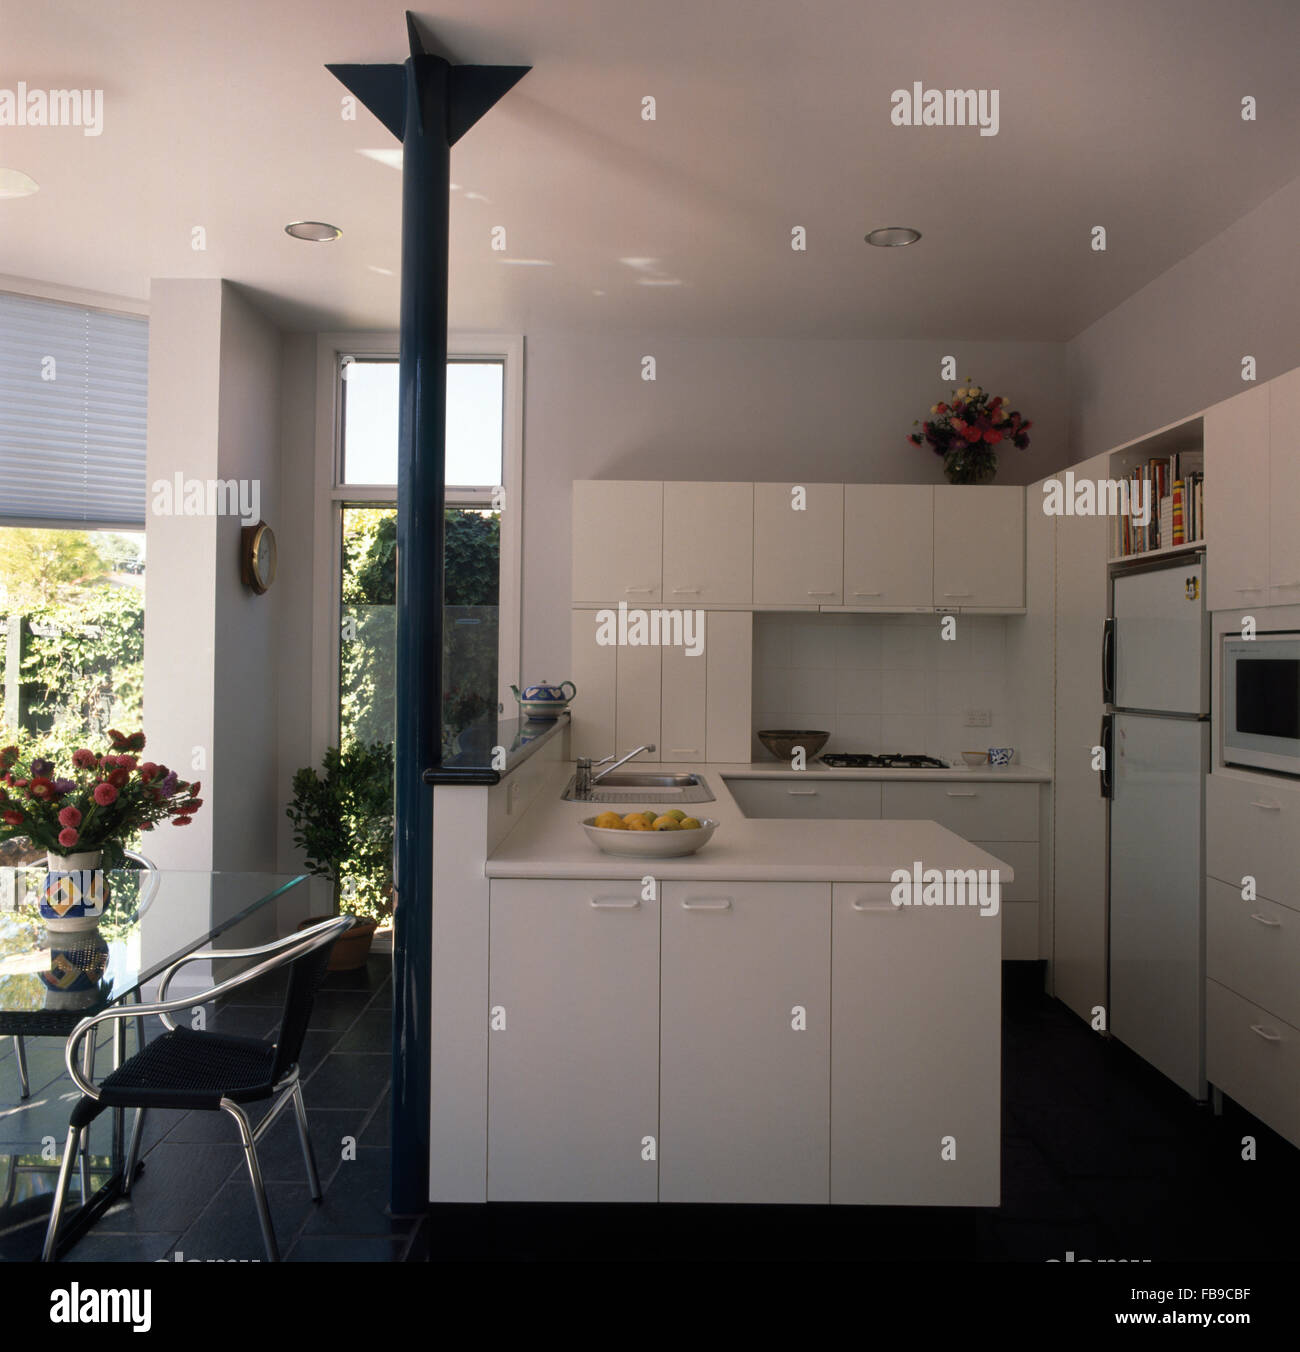 White nineties architectural kitchen with a gray metal pillar and slate flooring Stock Photo